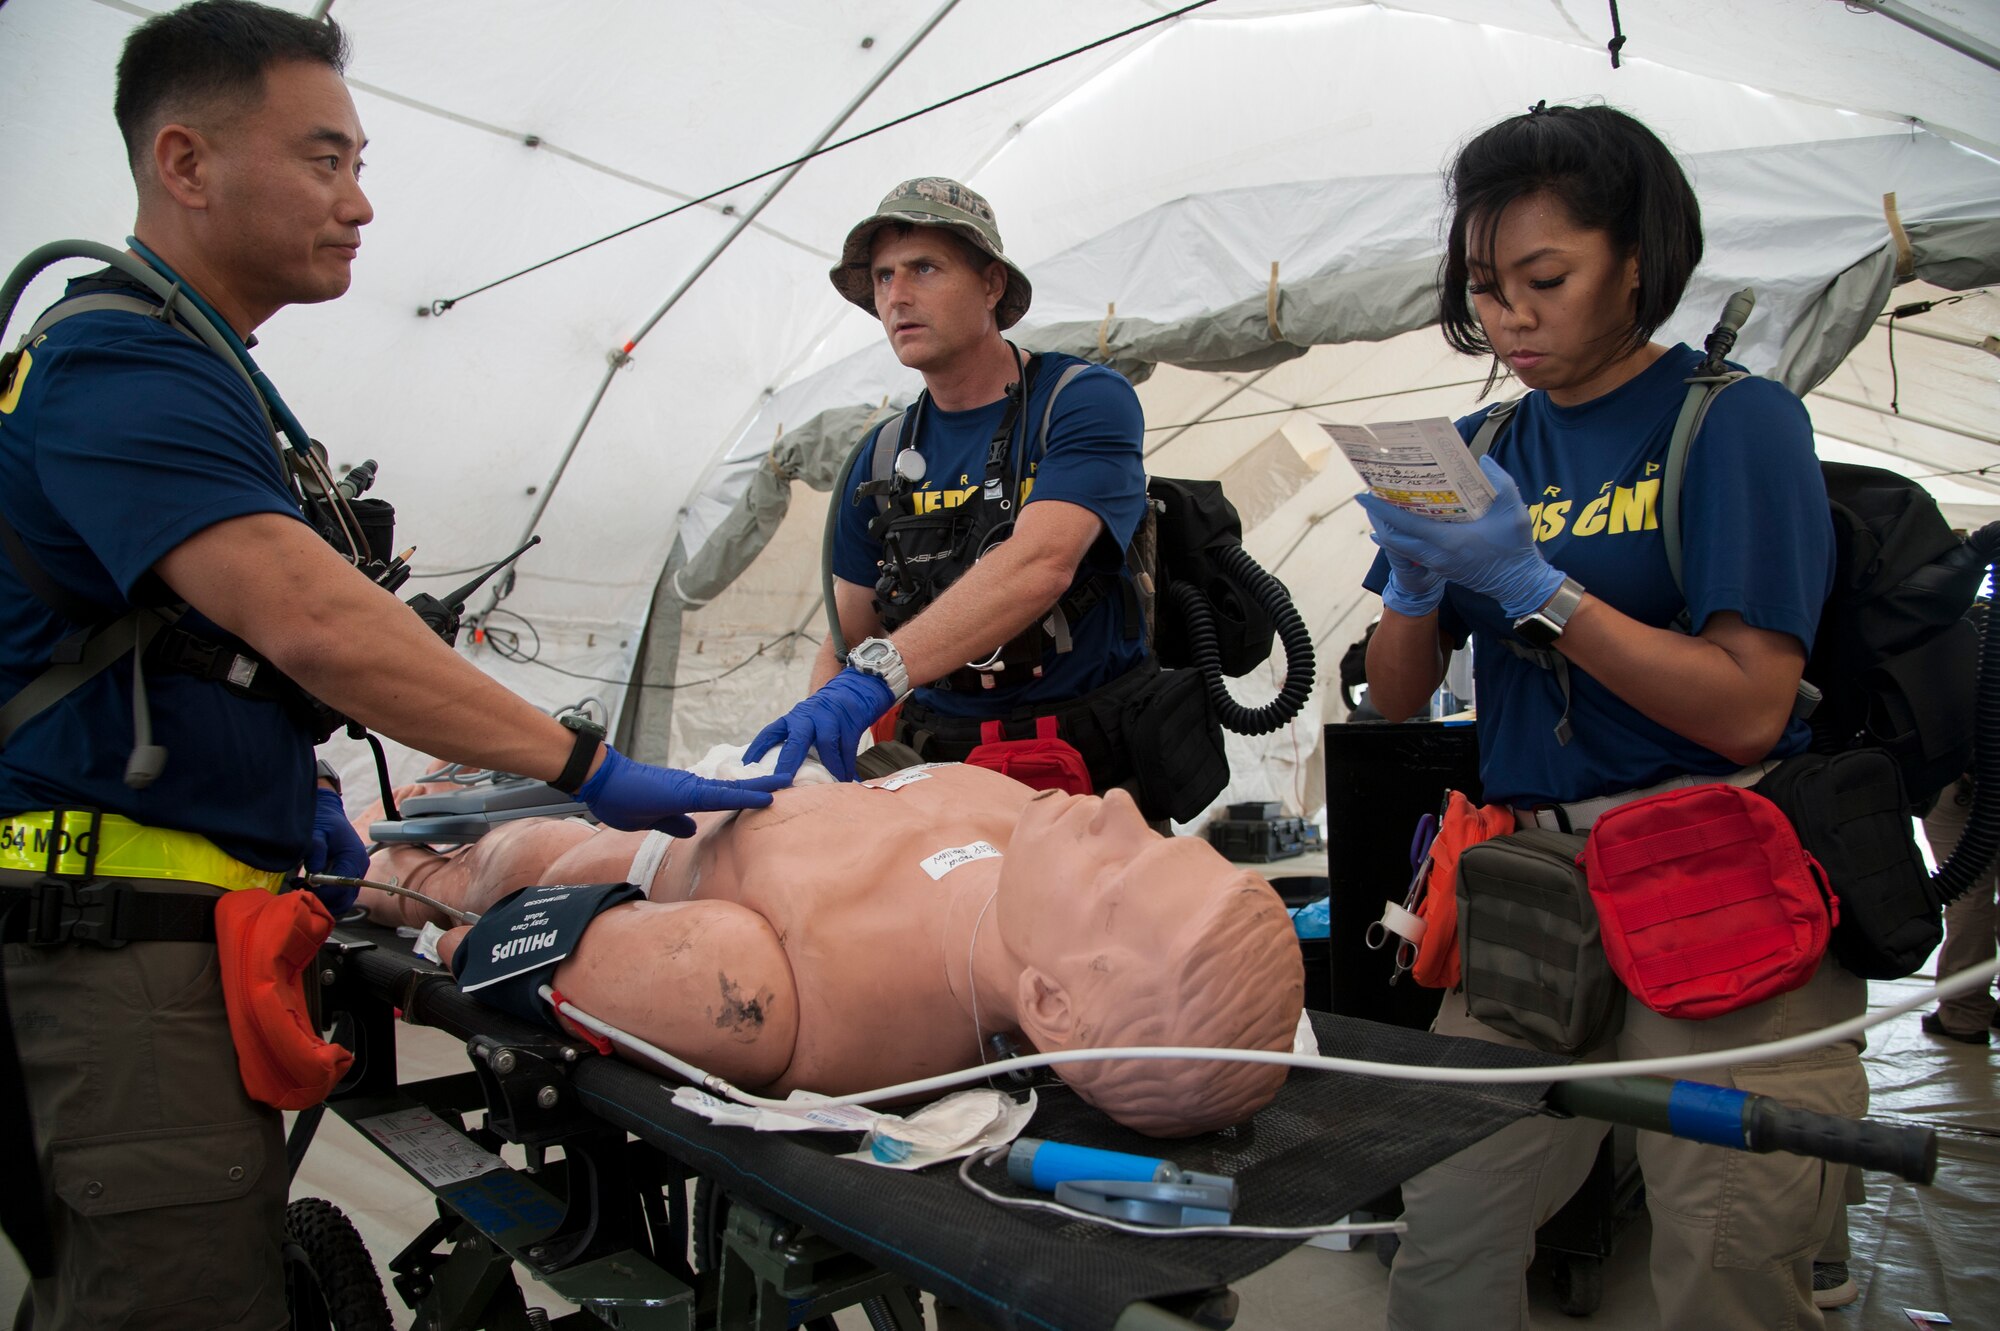 Members of the 154th Medical Group’s Detachment 1 treatment team, Maj. Tim Hiura, Lt. Col. Nathanial Duff and Capt. Ernette Visitacion, provide lifesaving interventions during an evaluation exercise March 9, 2019, at Kalaeloa, Hawaii.